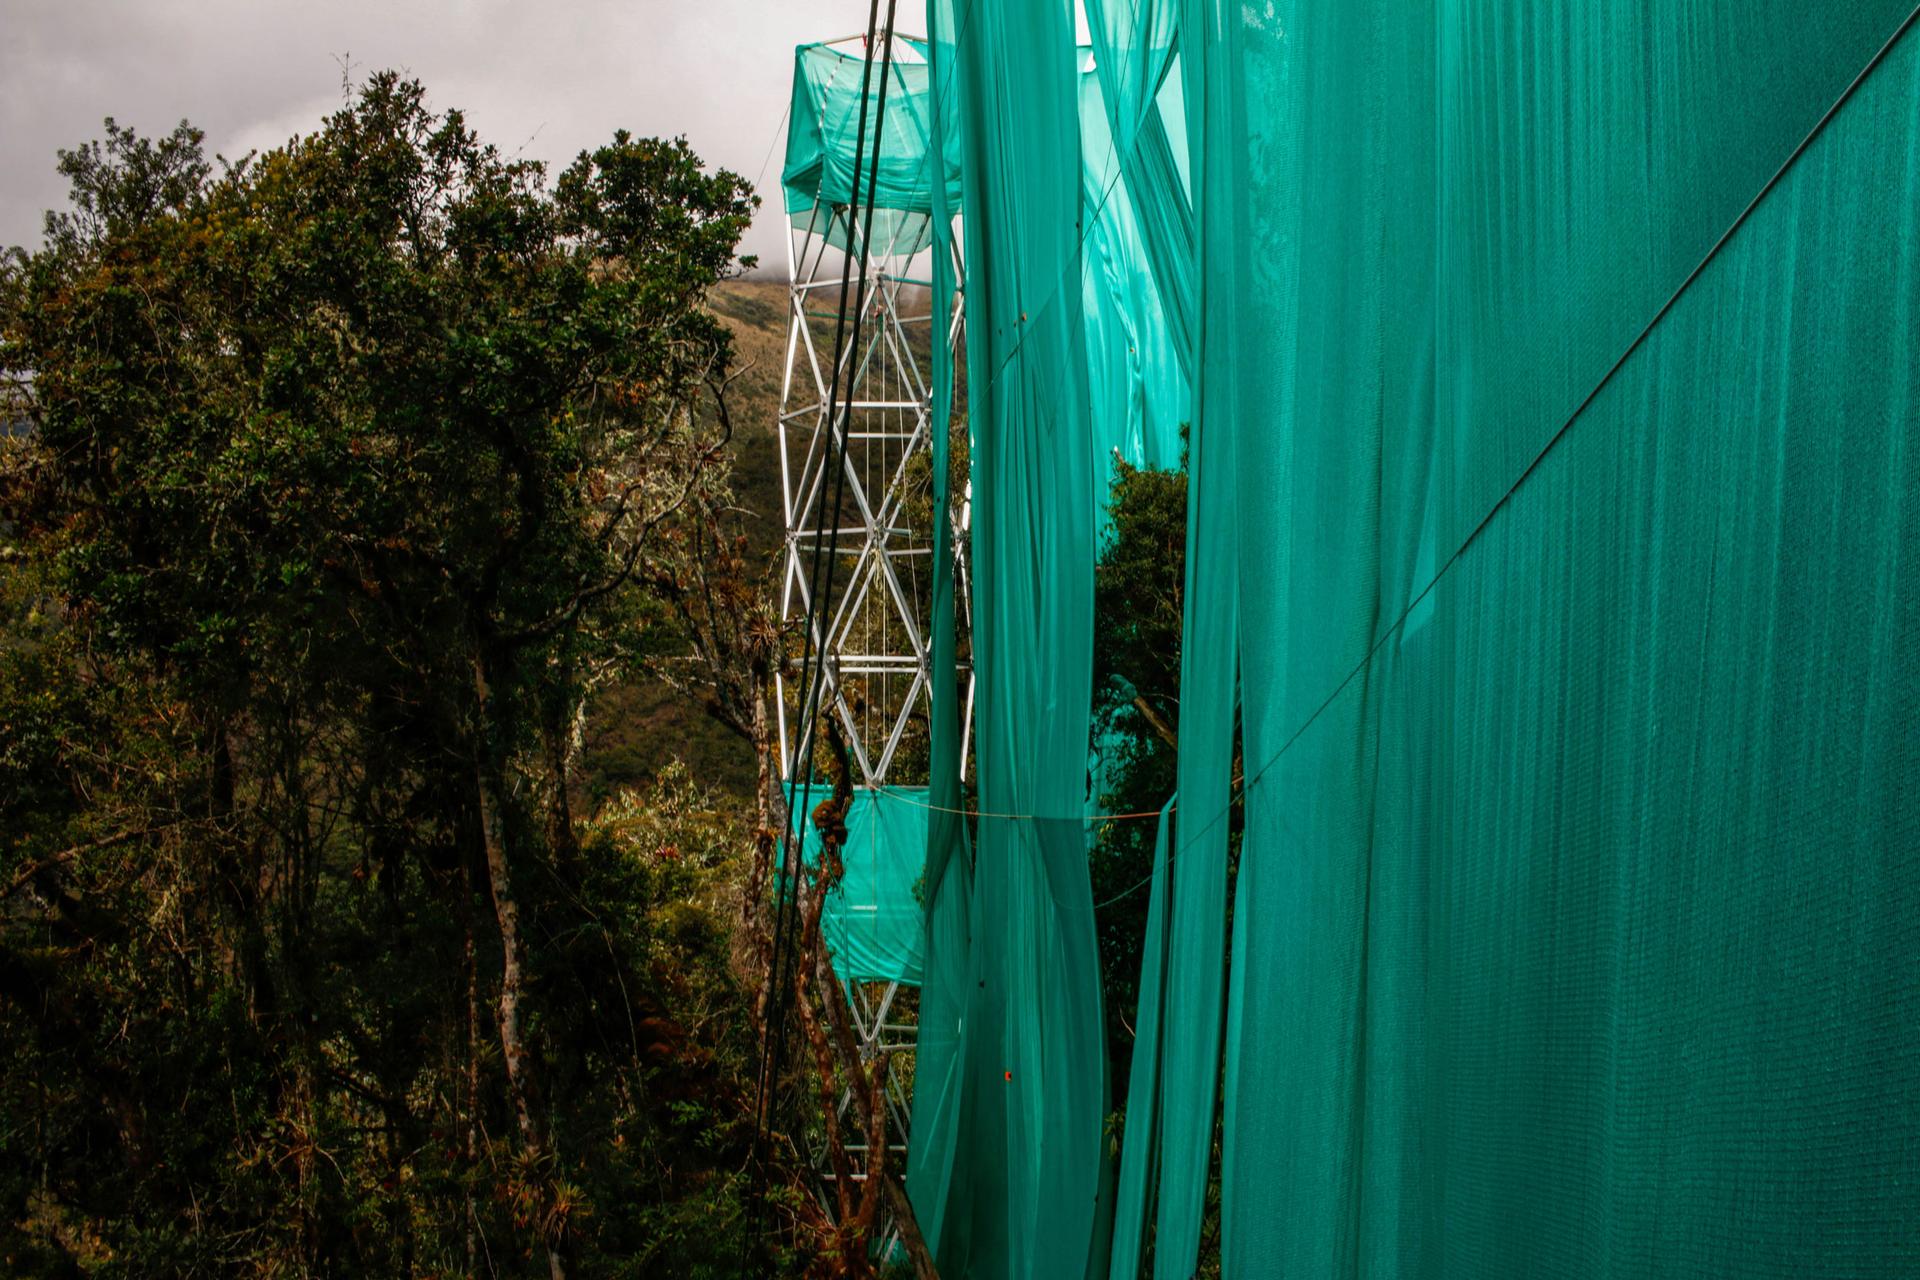 A large green curtain is shown next to scafolding among the trees.